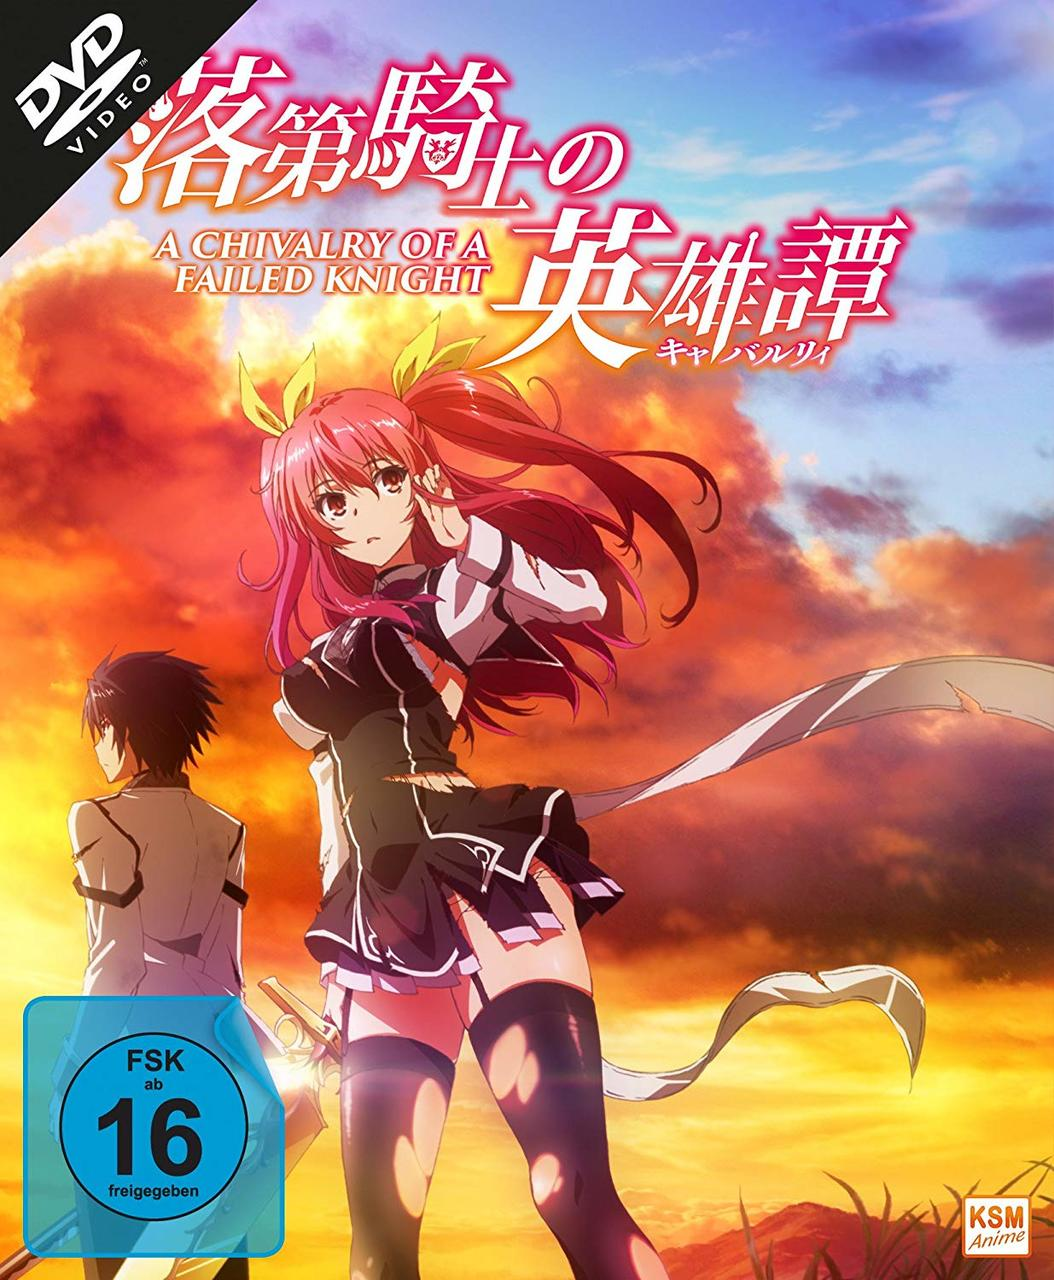 Failed Chivalry DVD Knight a - (Episoden Gesamtedition 1-12) of A